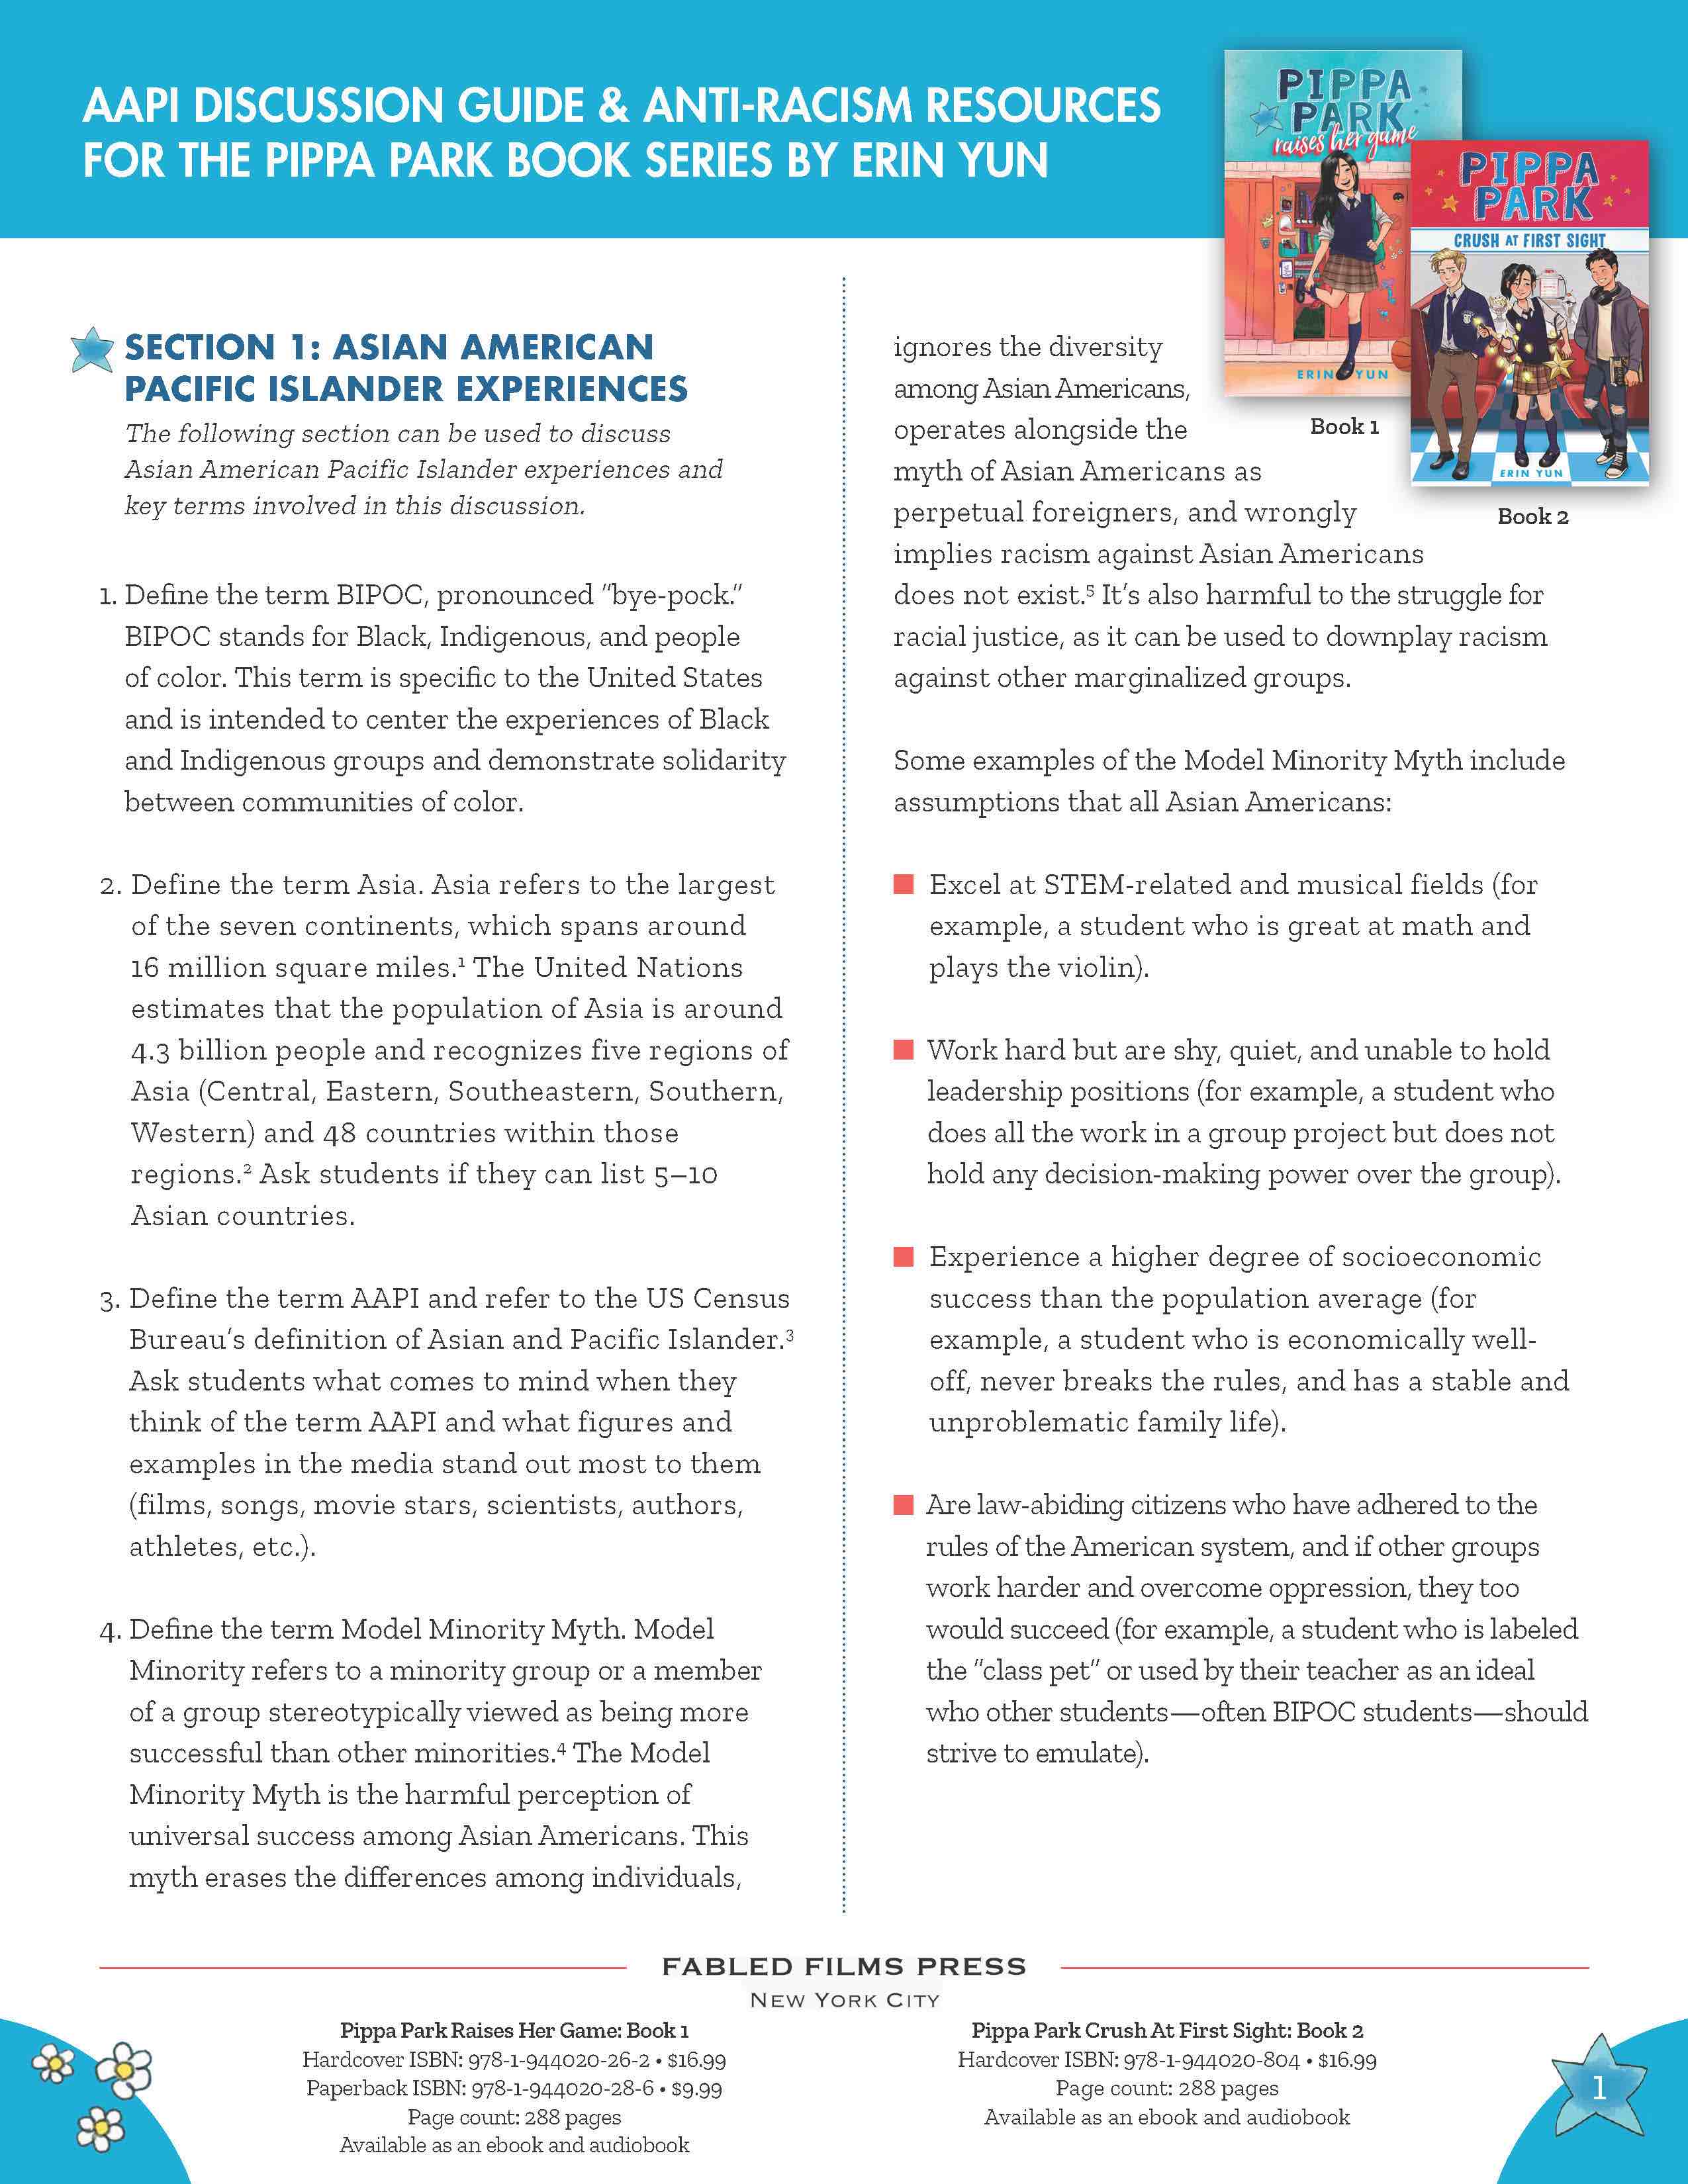 These images show four sample pages of the complimentary Pippa Park AAPI Guide that contains discussion questions that explore Asian American experiences for the book series. 